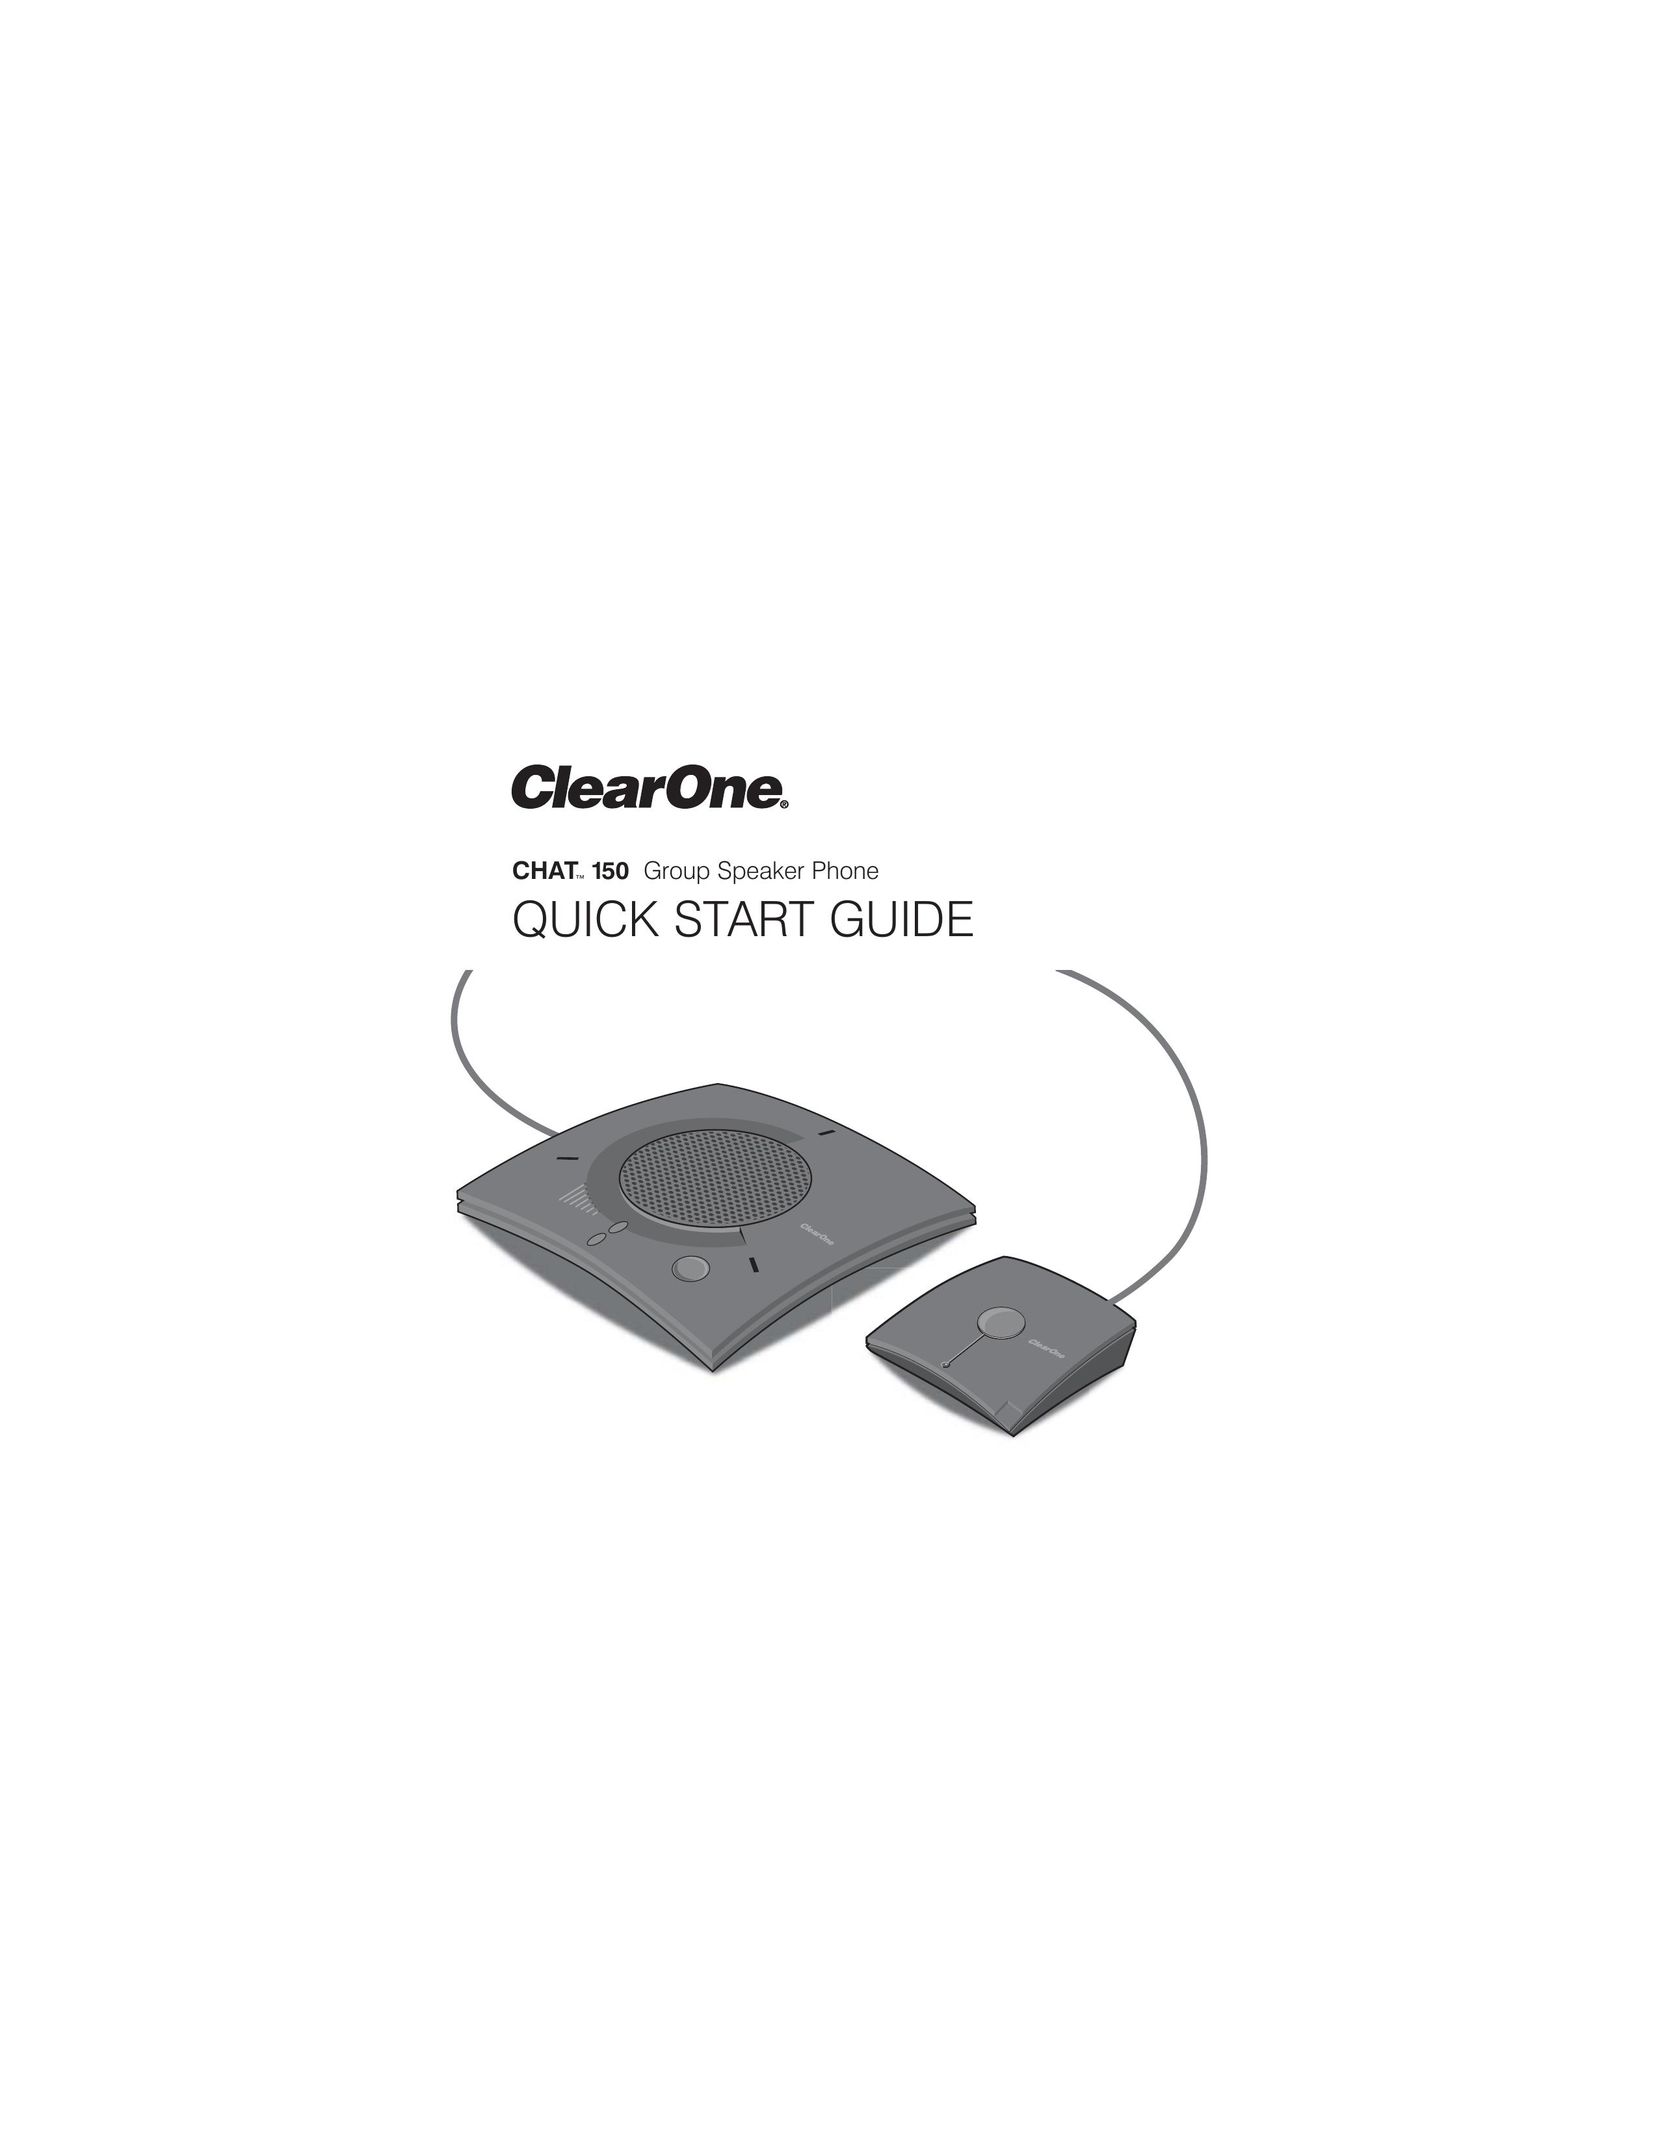 ClearOne comm CHATTM 150 Conference Phone User Manual